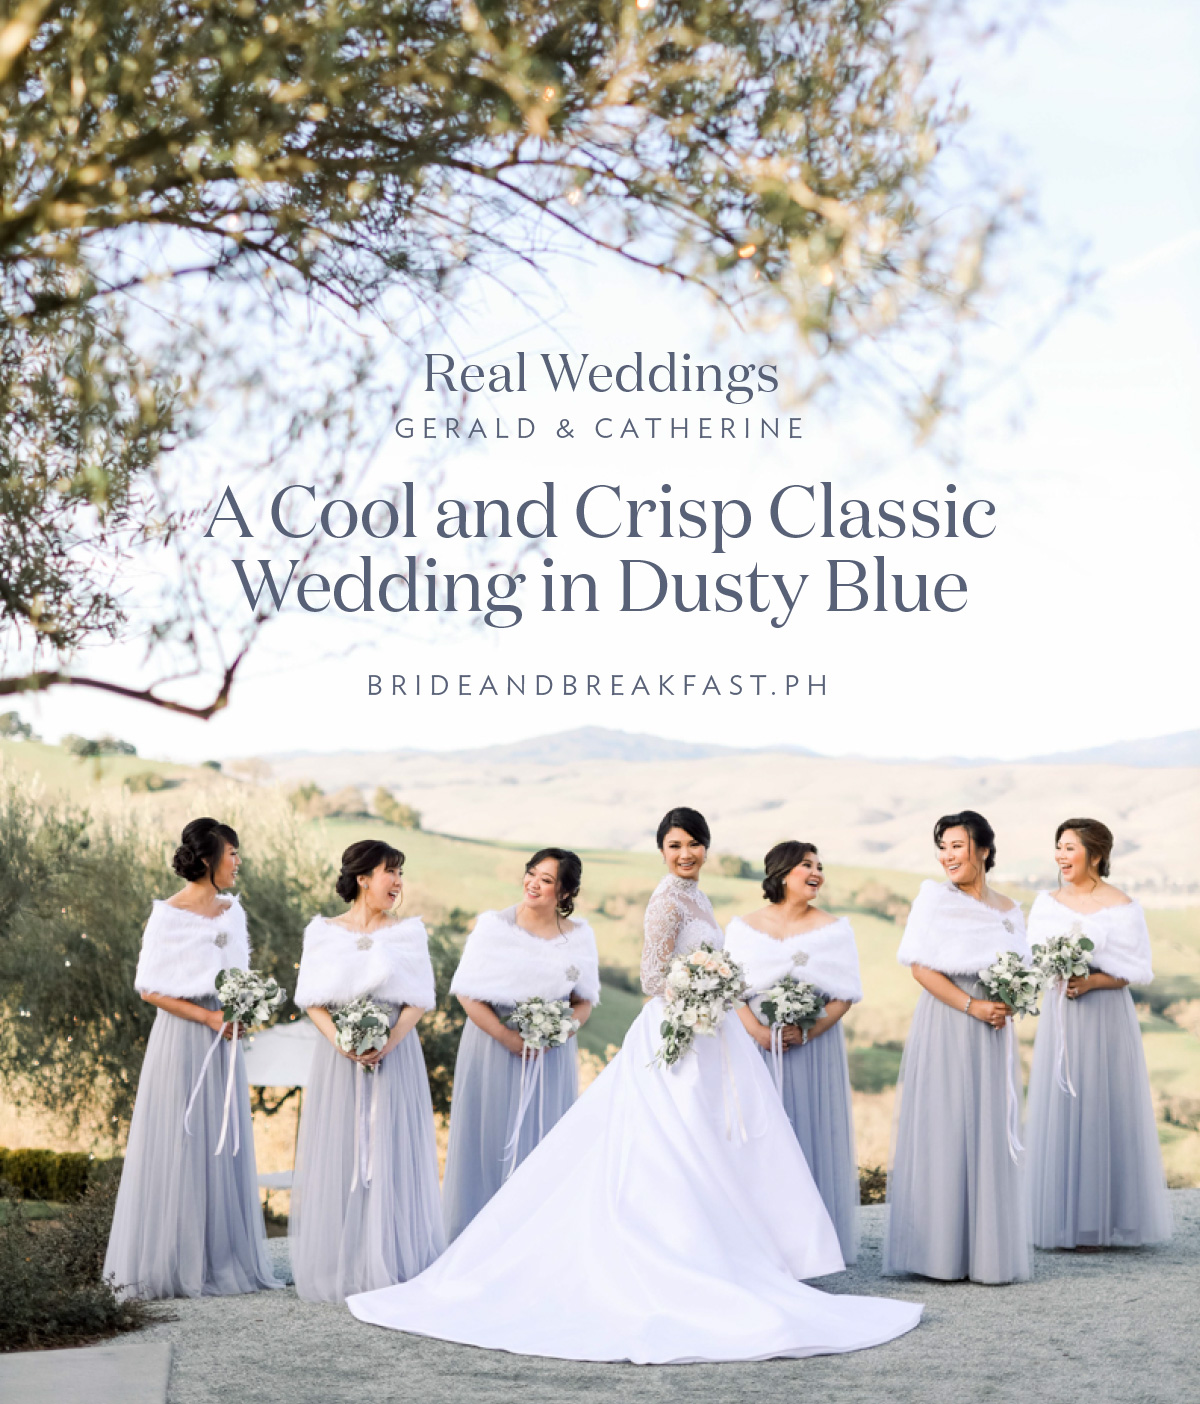 A Cool and Crisp Classic Wedding in Dusty Blue